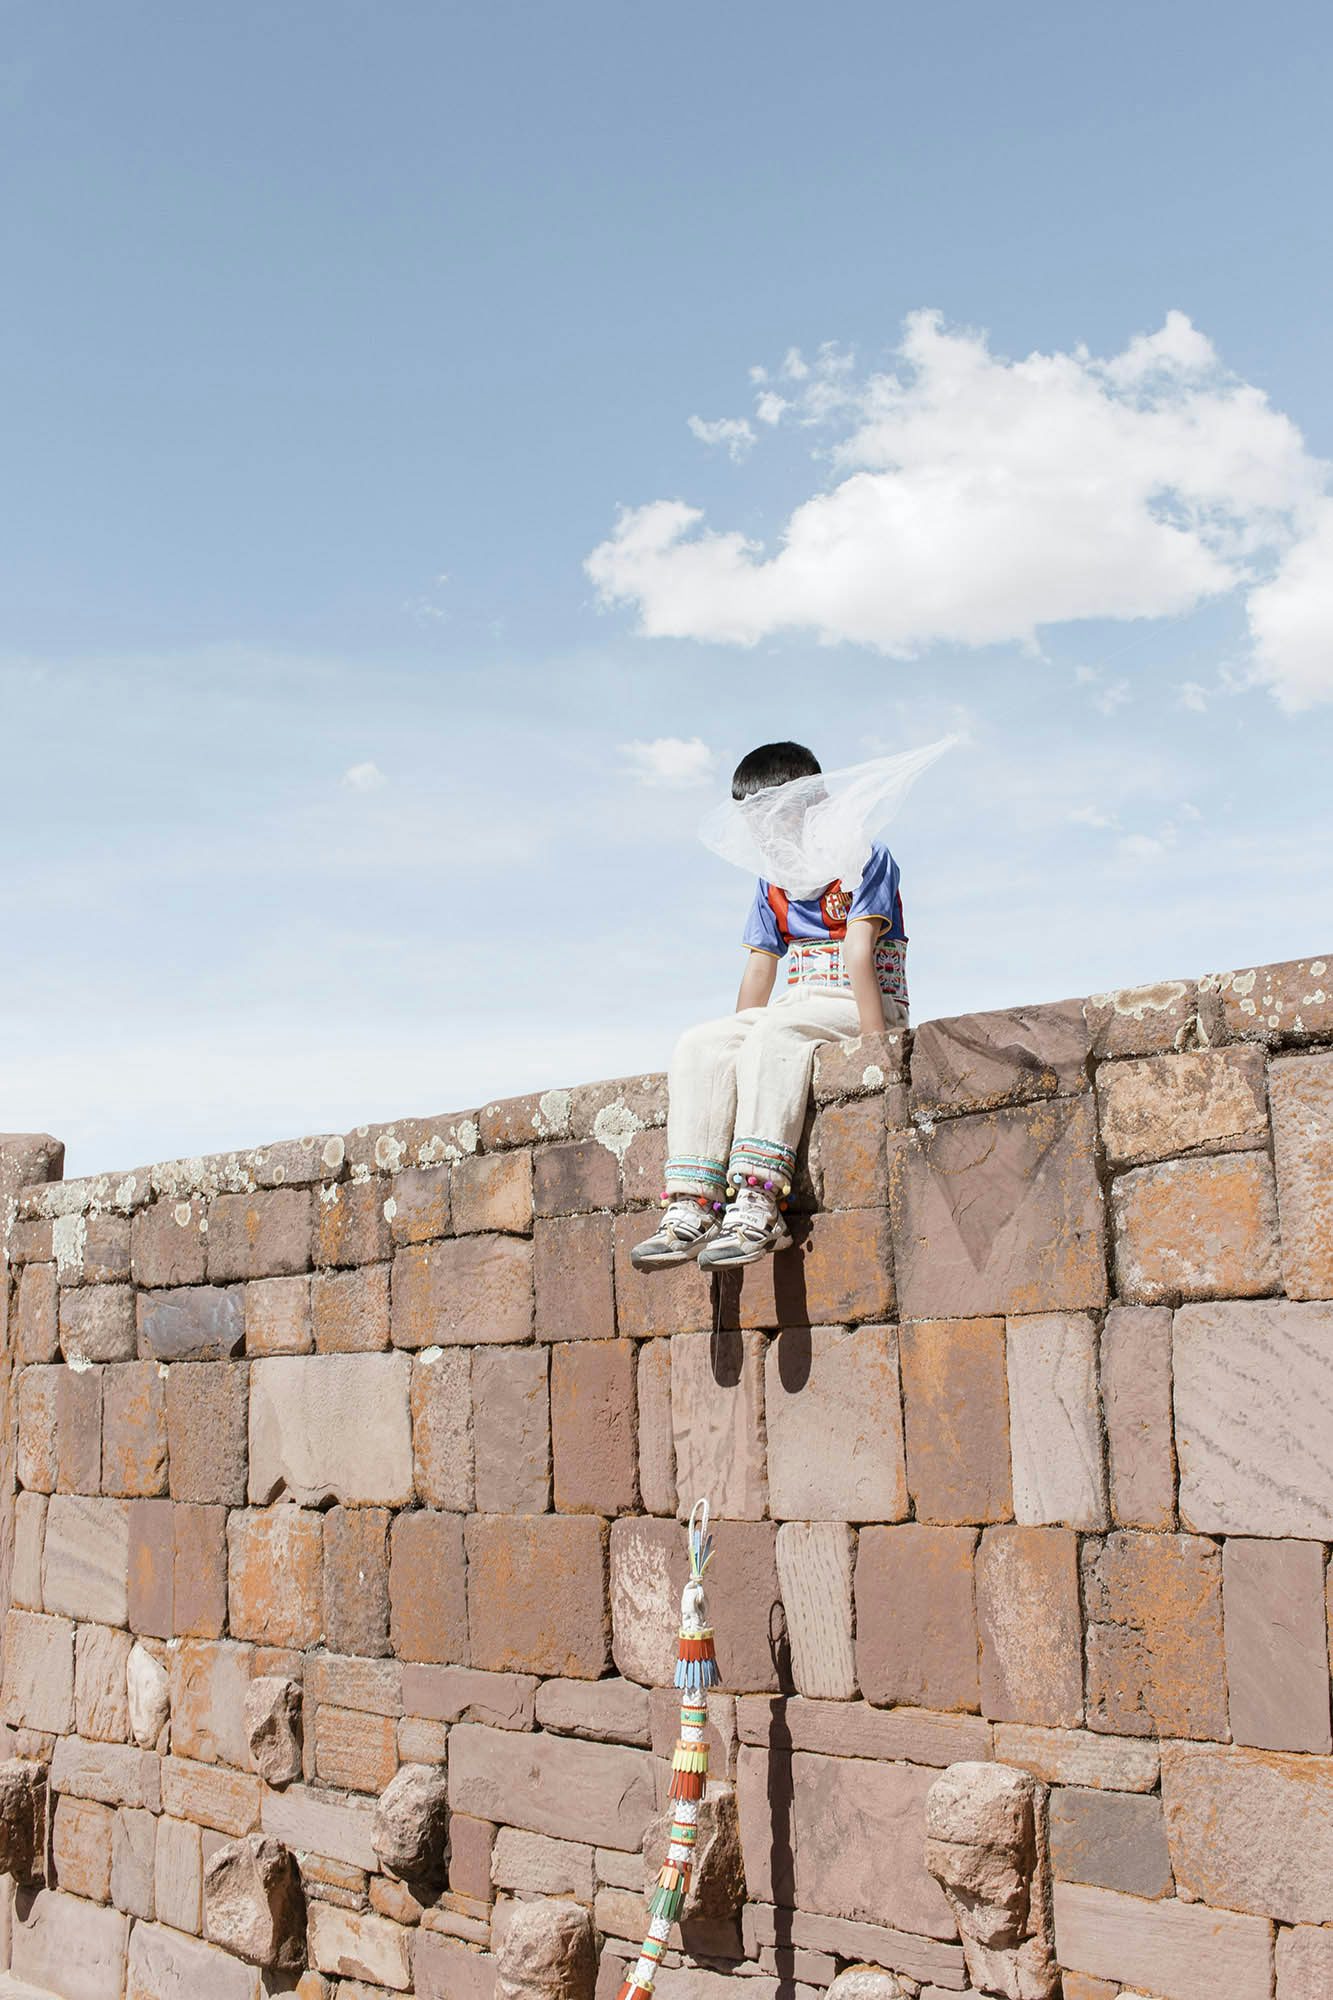 Image by River Claure showing a young boy with his face covered my material, sat atop a wall